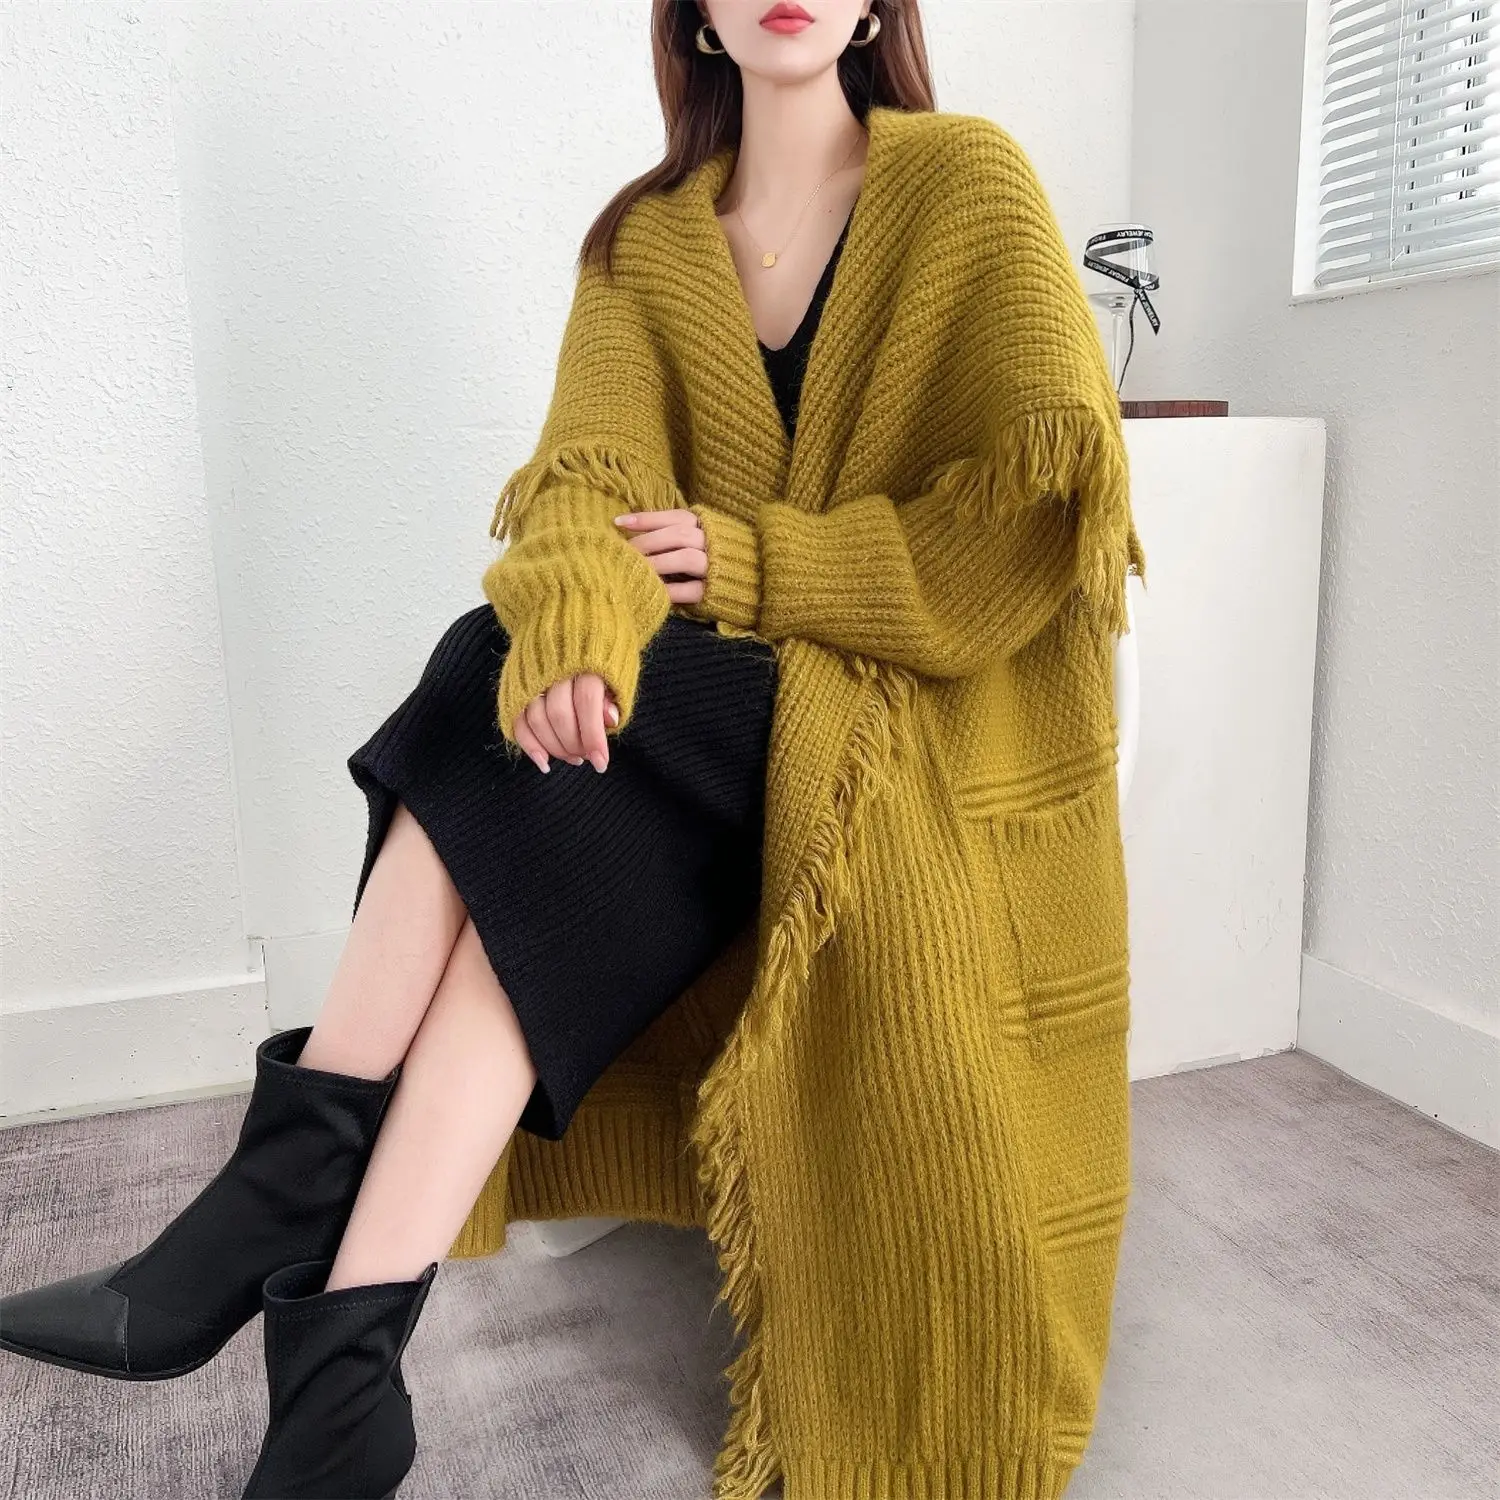 2023 Cardigans Knit Sweater Women Autumn and Winter Loose Soft Coat Fashion Open Stitch Long Knitted Jacket Cardigan Sweater D74